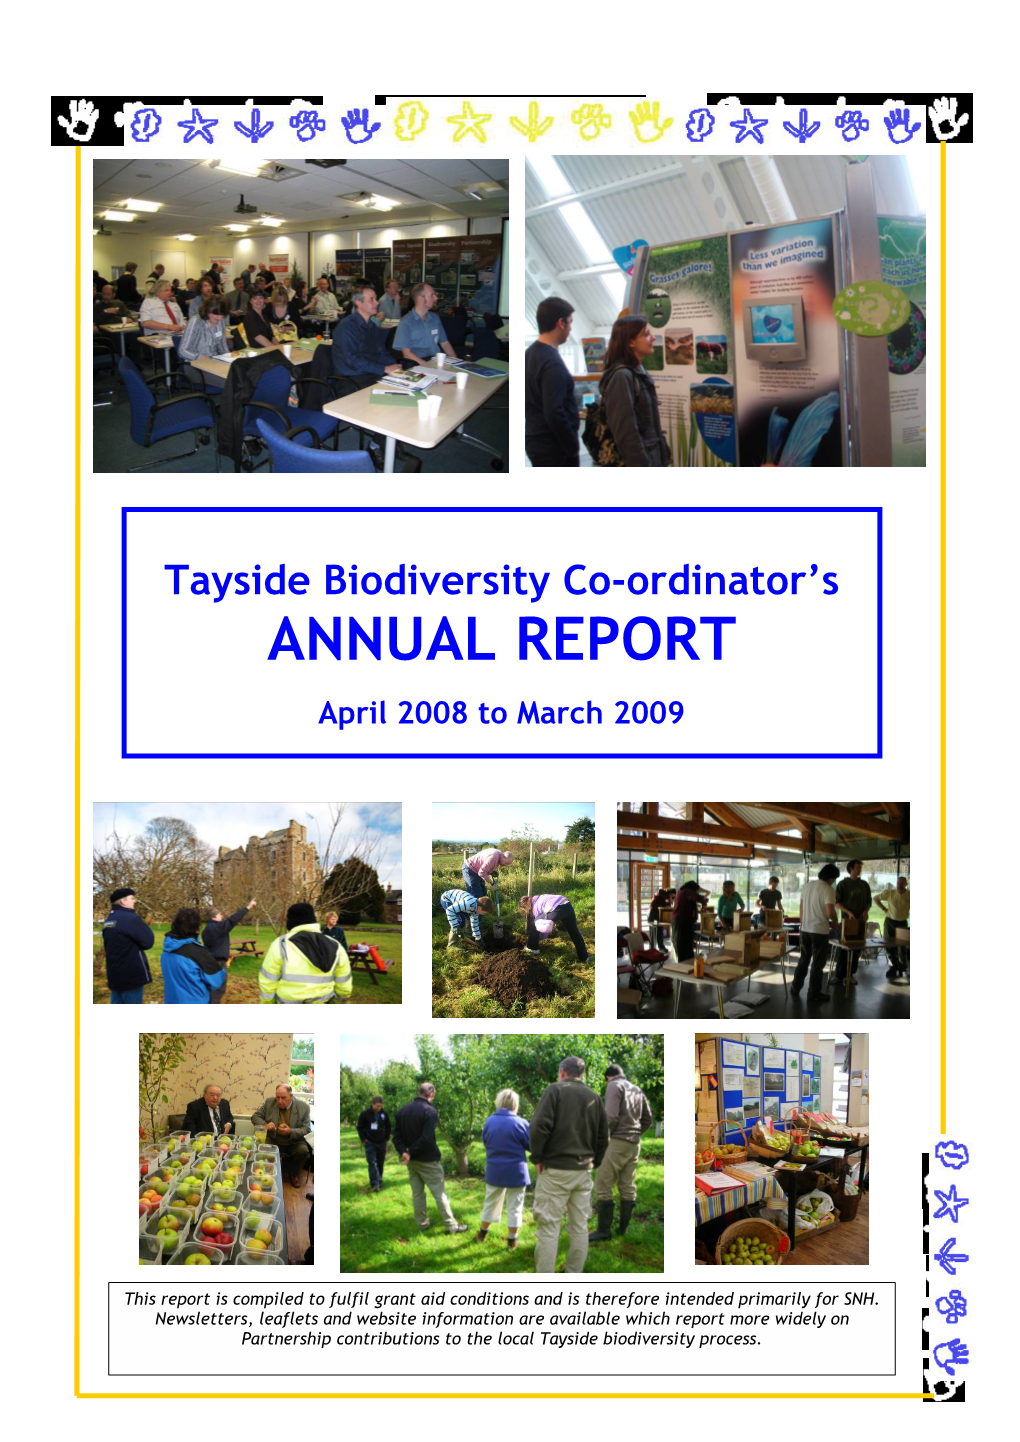 Co-Ordinate and Support the Work of the Tayside Biodiversity Partnership 2